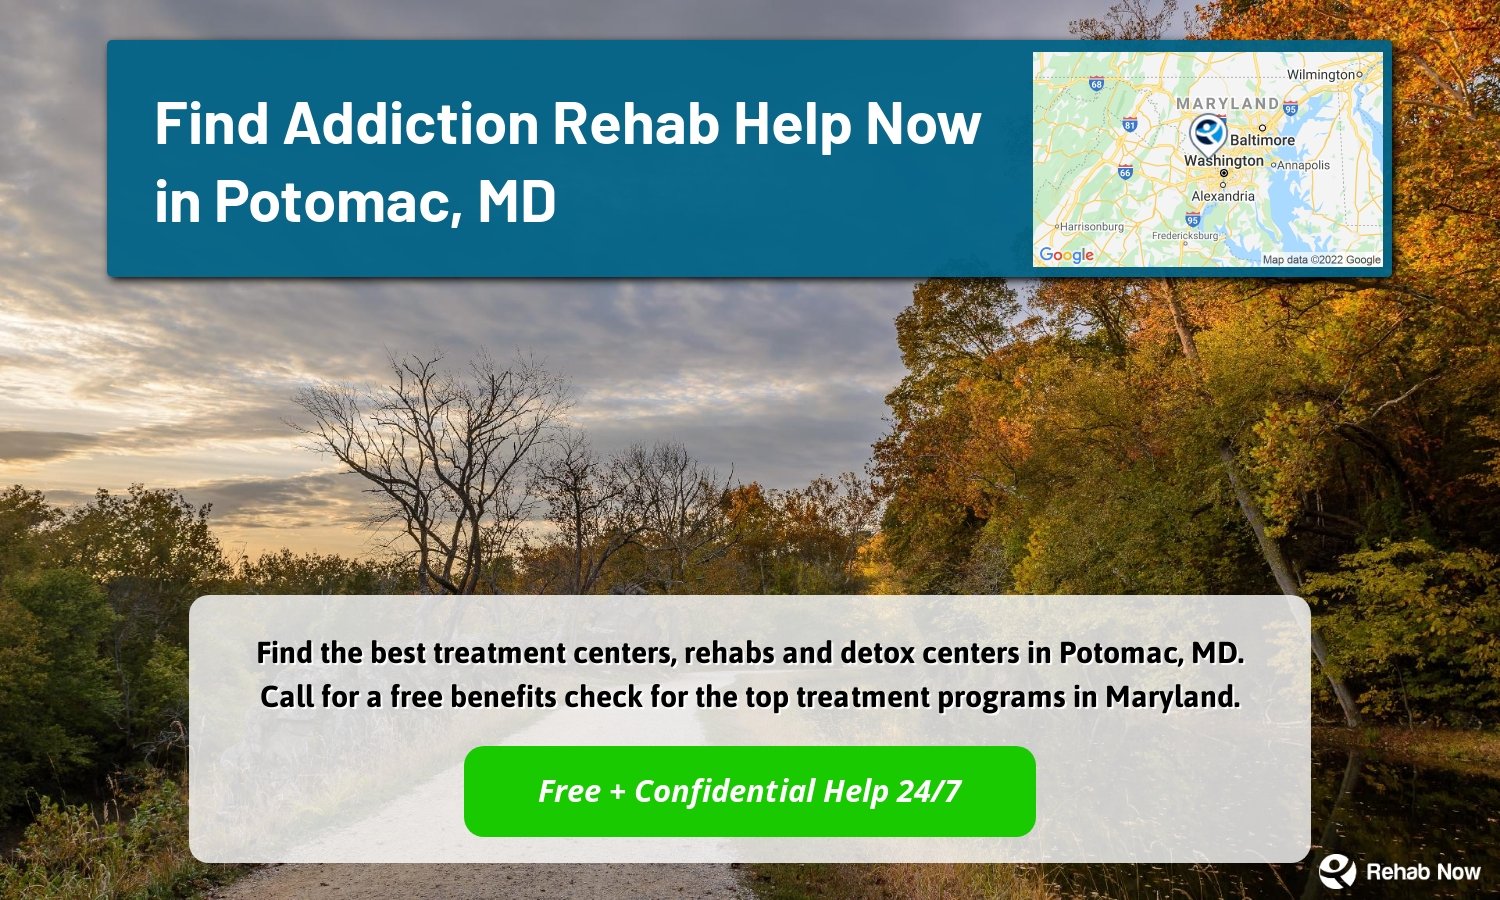 Find the best treatment centers, rehabs and detox centers in Potomac, MD. Call for a free benefits check for the top treatment programs in Maryland.